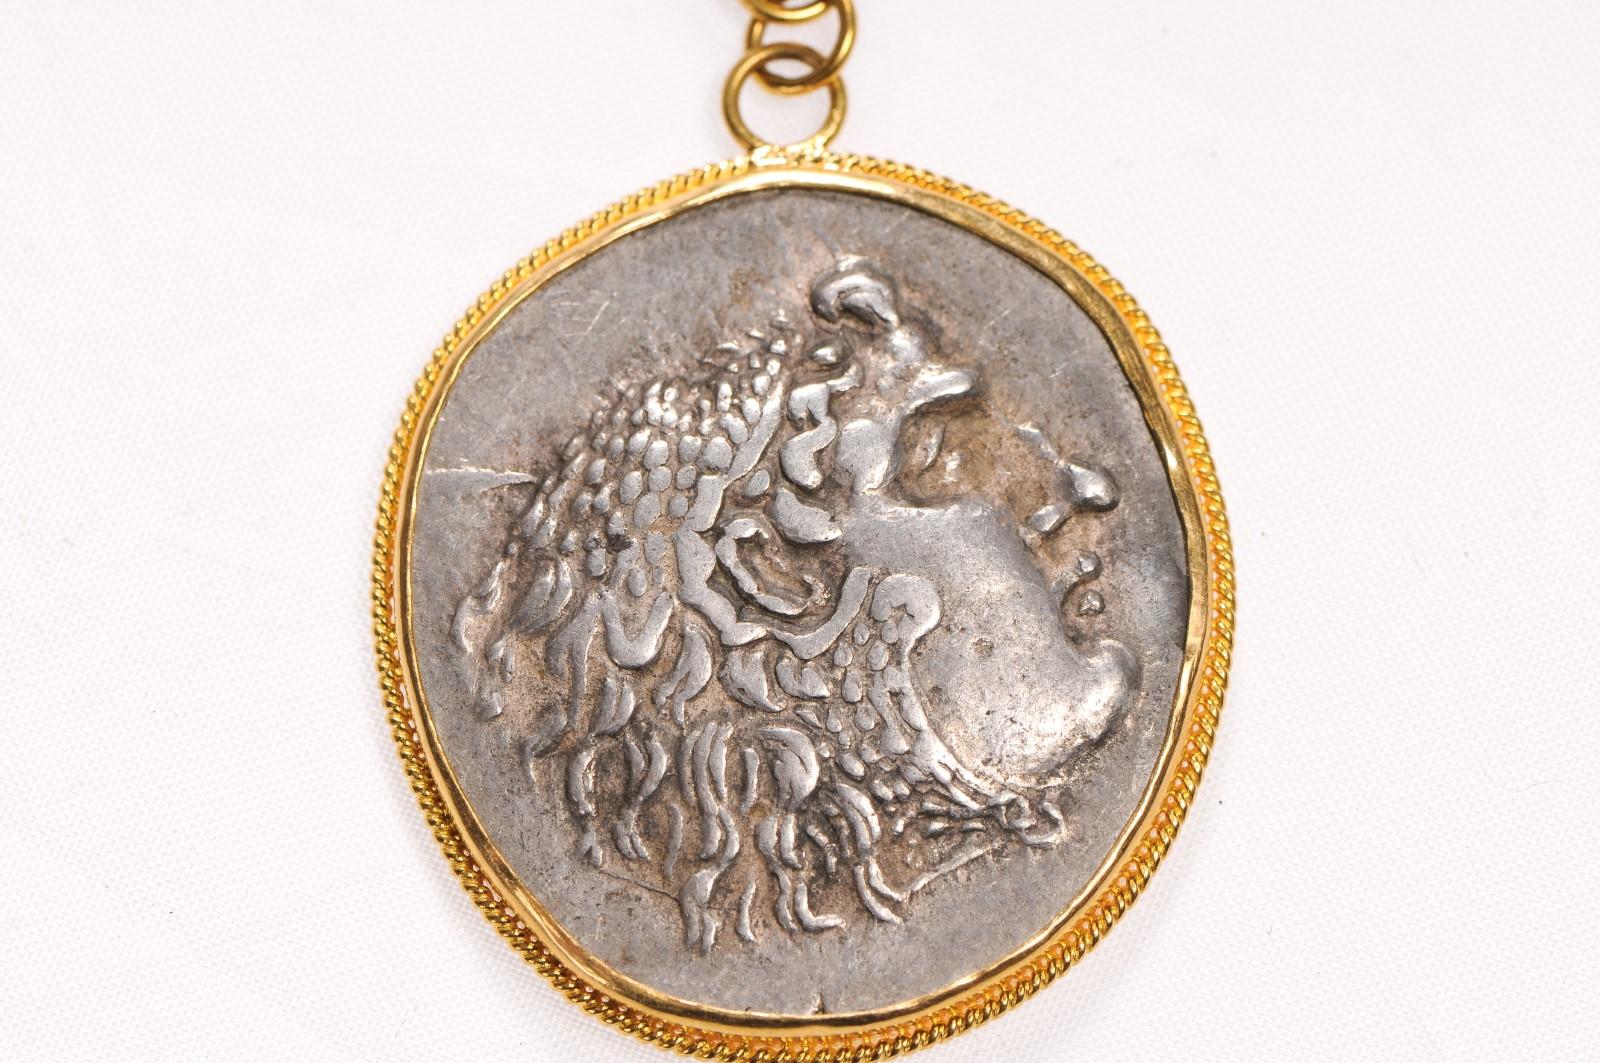 An Authentic Greek (Macedonian) Alexander the Great Tetradrachm Coin, 336 - 323 BC, set in a 22k Gold Bezel and Bail with an Emerald Stone Accent. Obverse of Coin is Heracles and Zeus Reverse. Coin pendant measures approximately 2 1/3